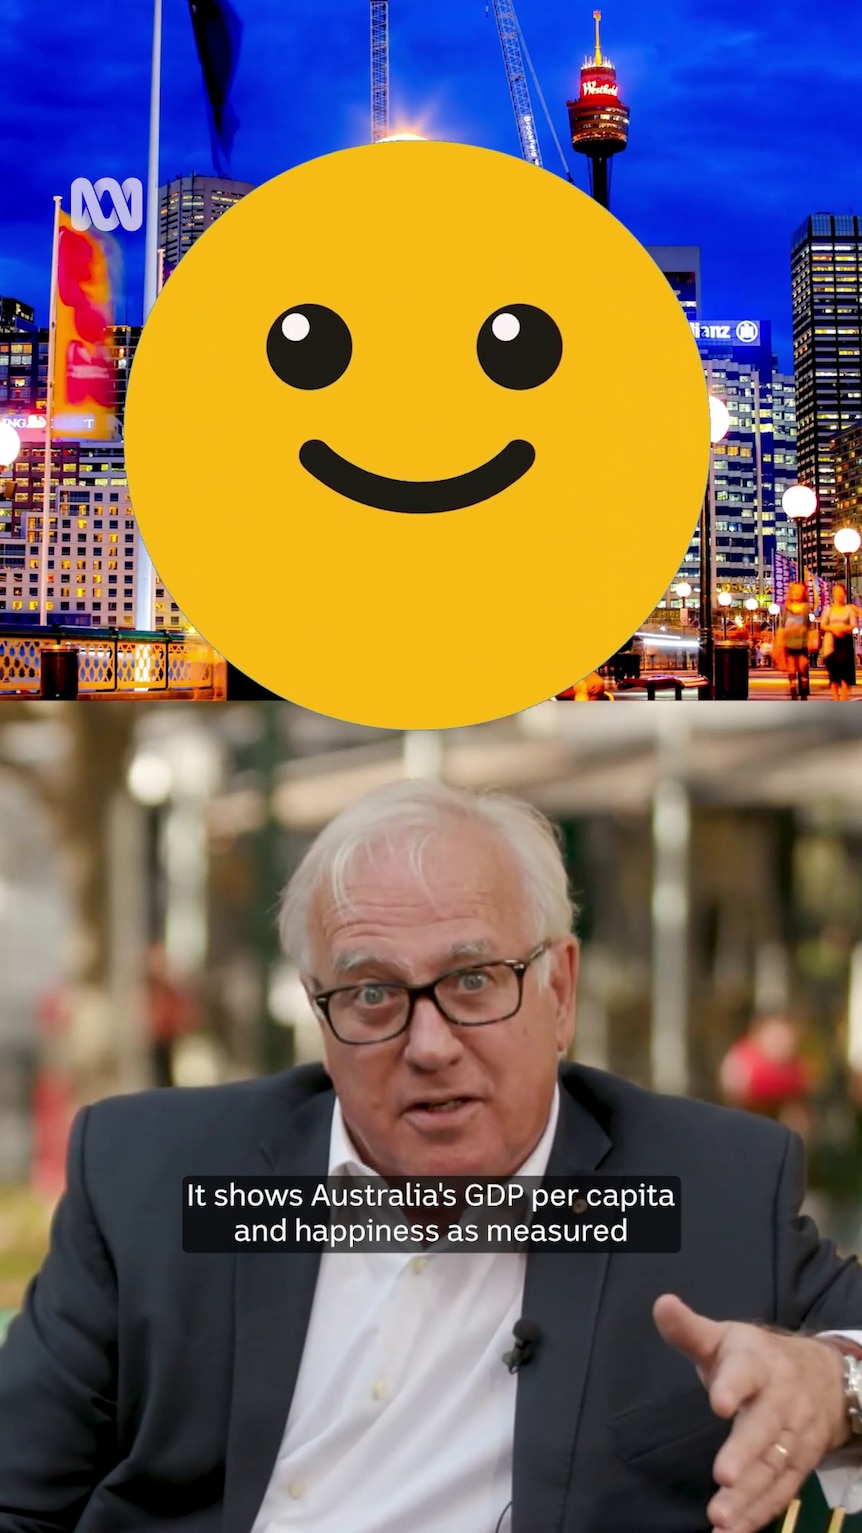 A white man with white hair in a white shirt and suit jacket gesticulates under a yellow happy face emoji